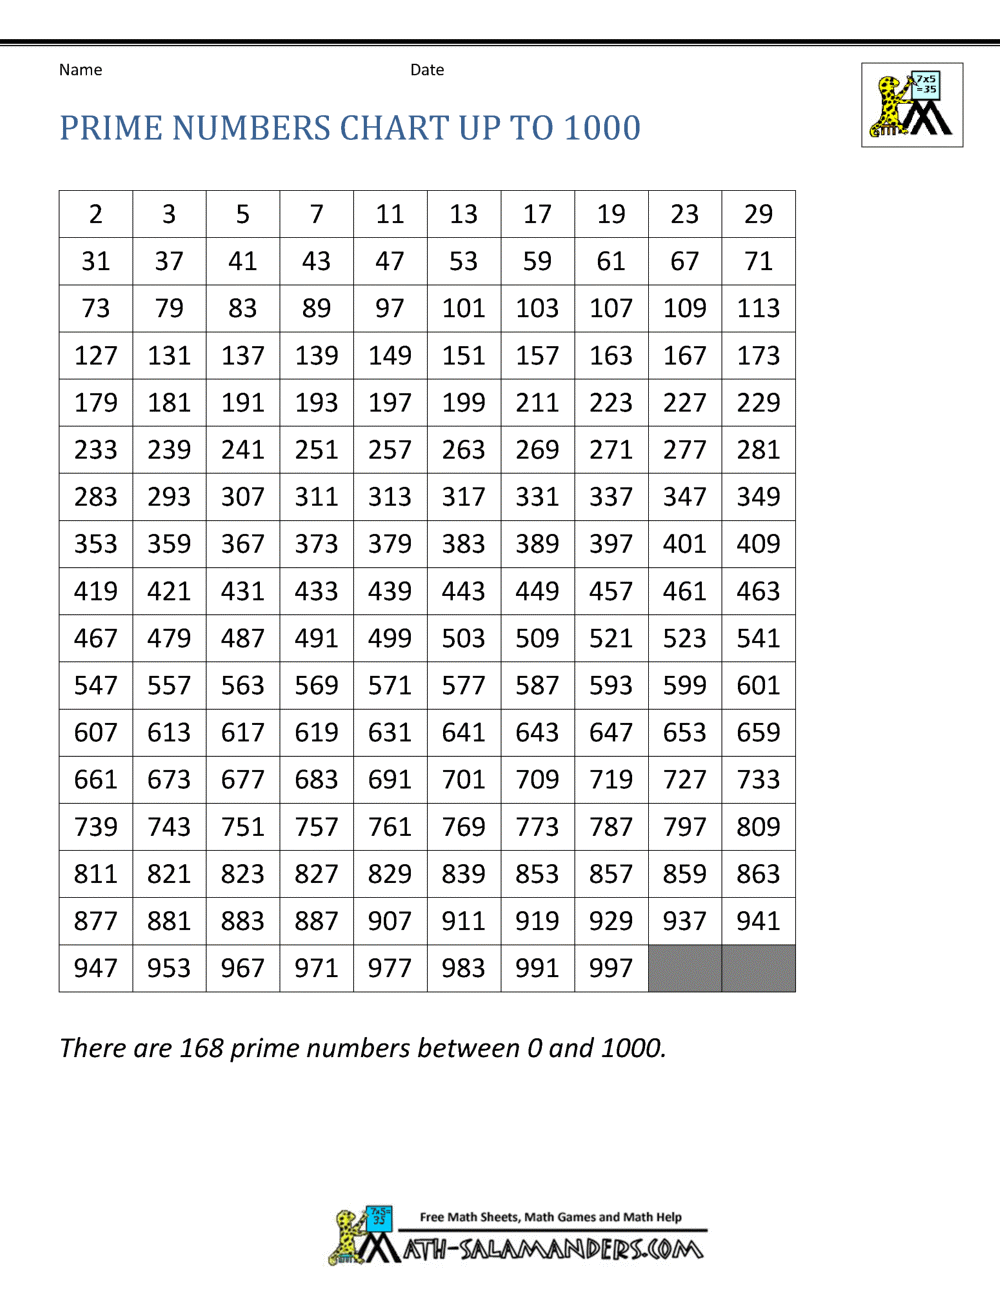 prime-numbers-chart